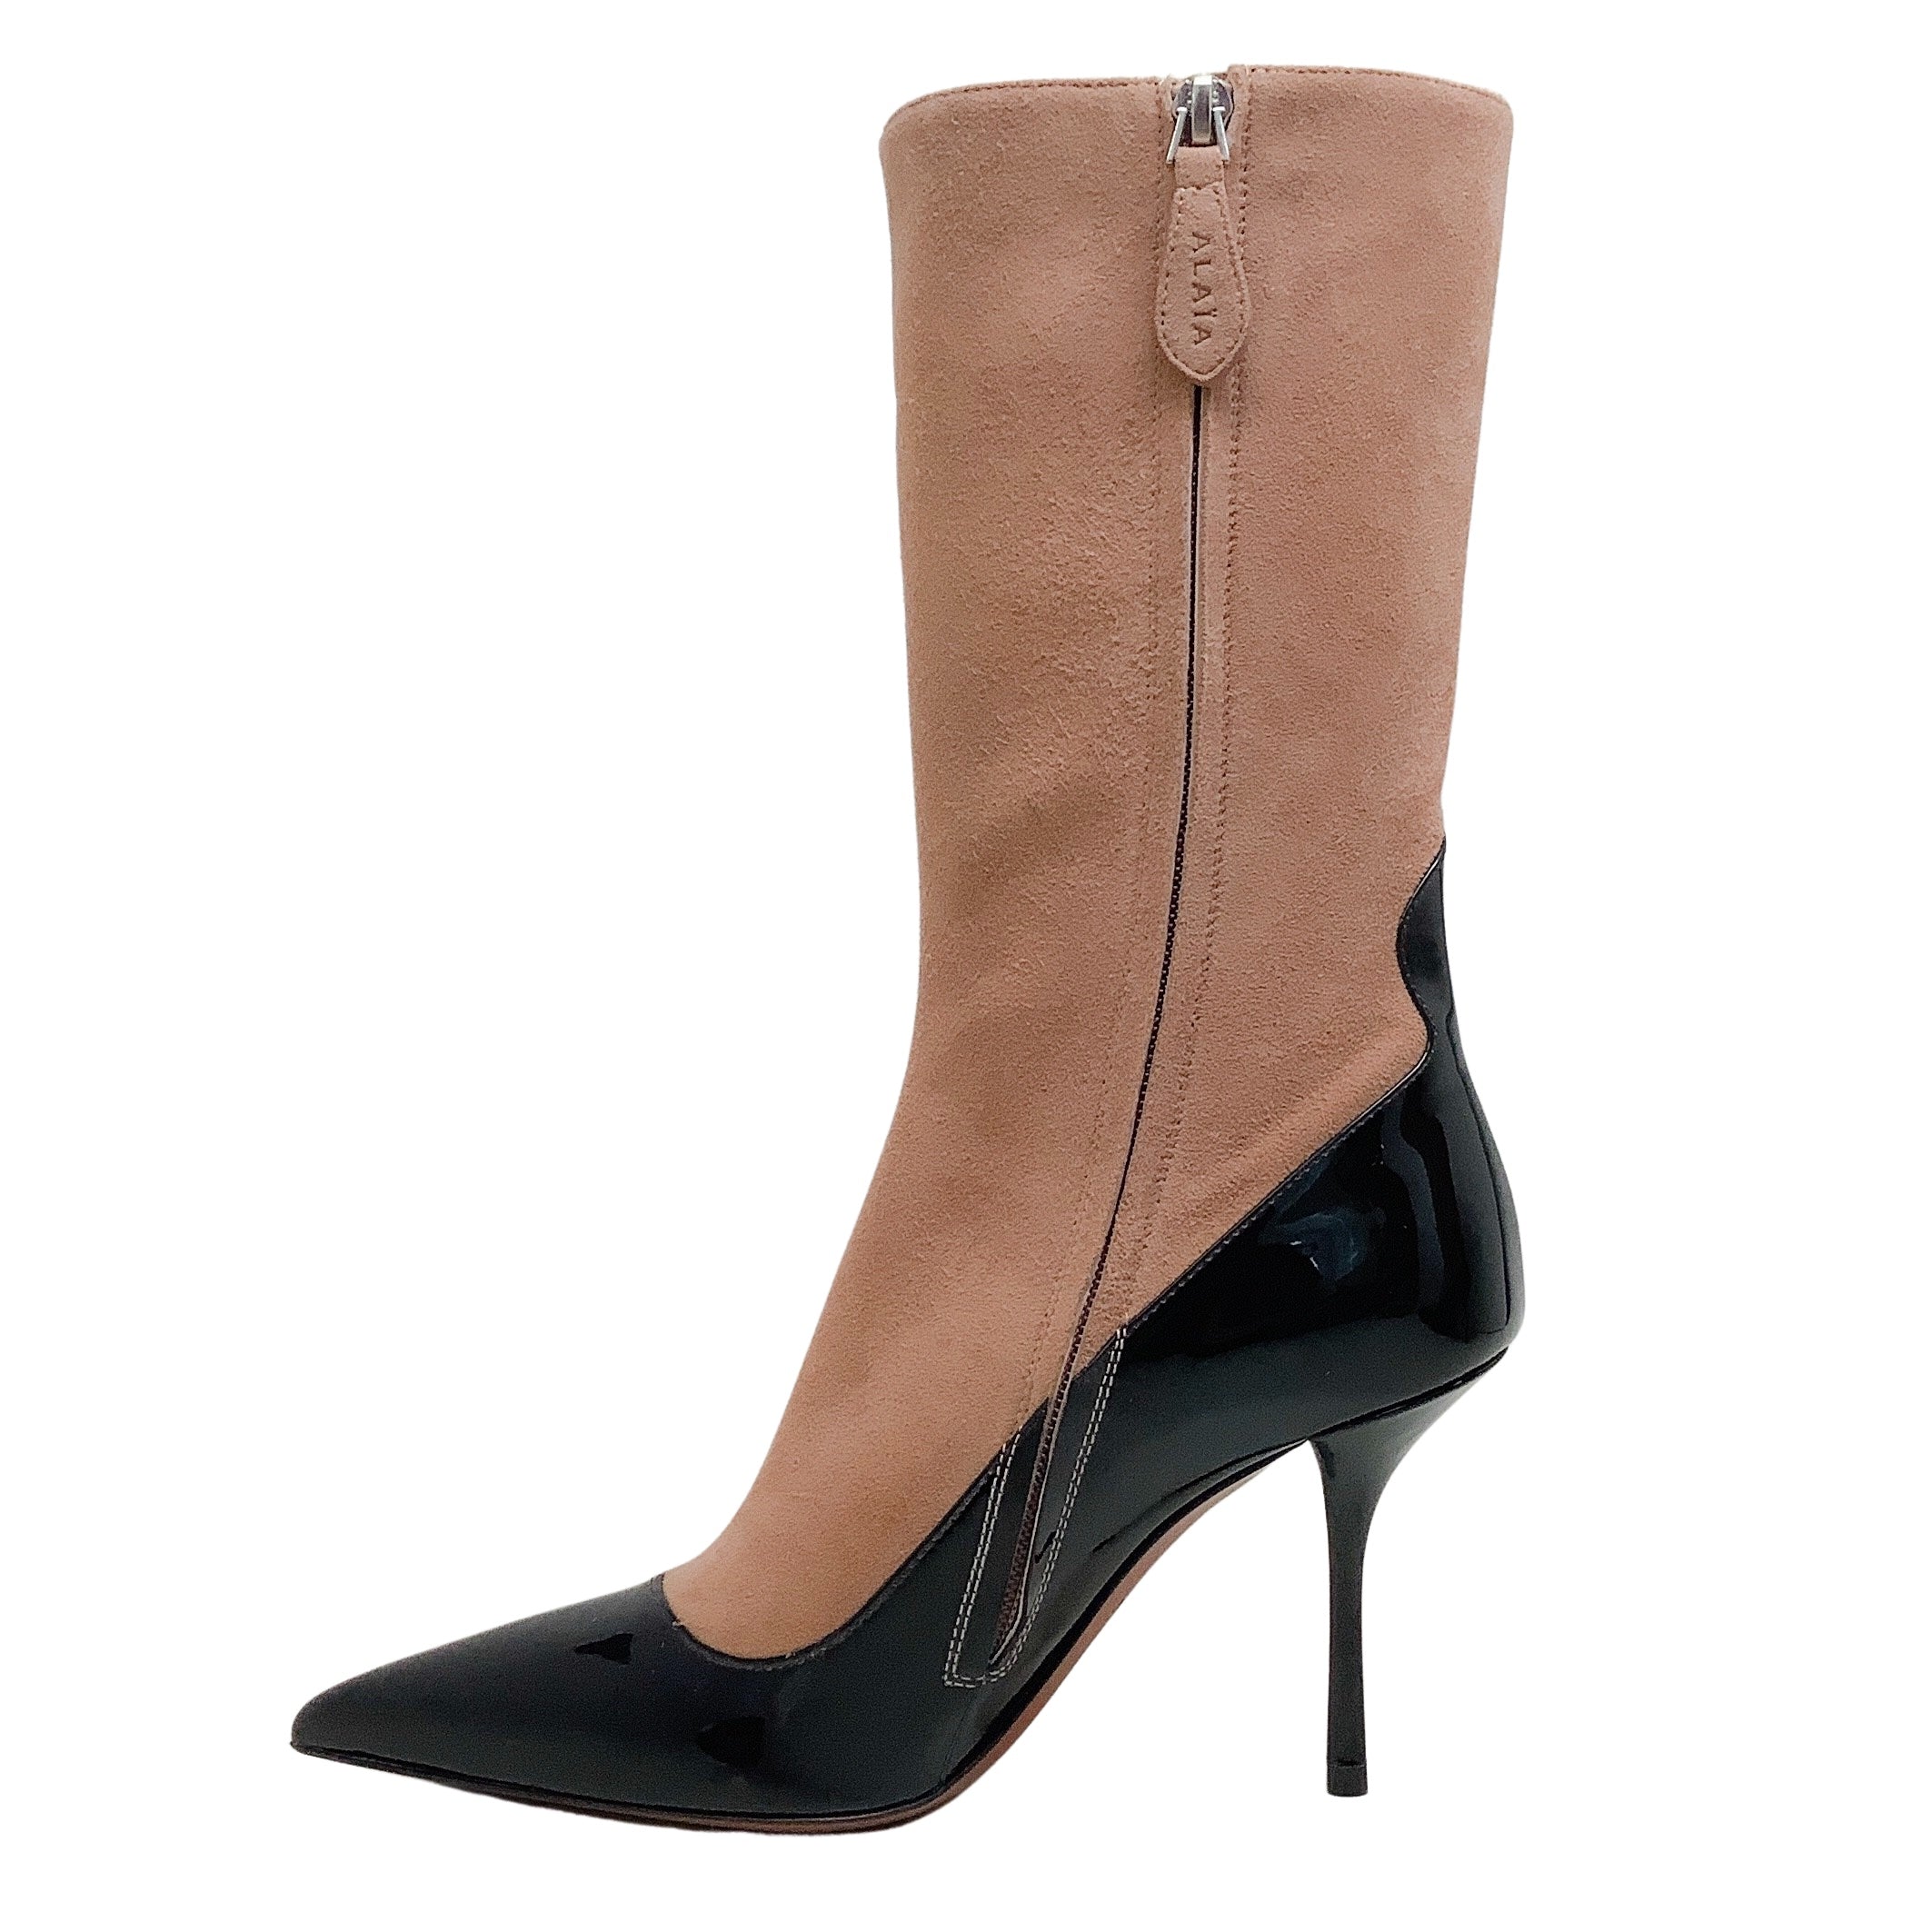 Alaia Nude Suede / Black Patent Short Boot 90